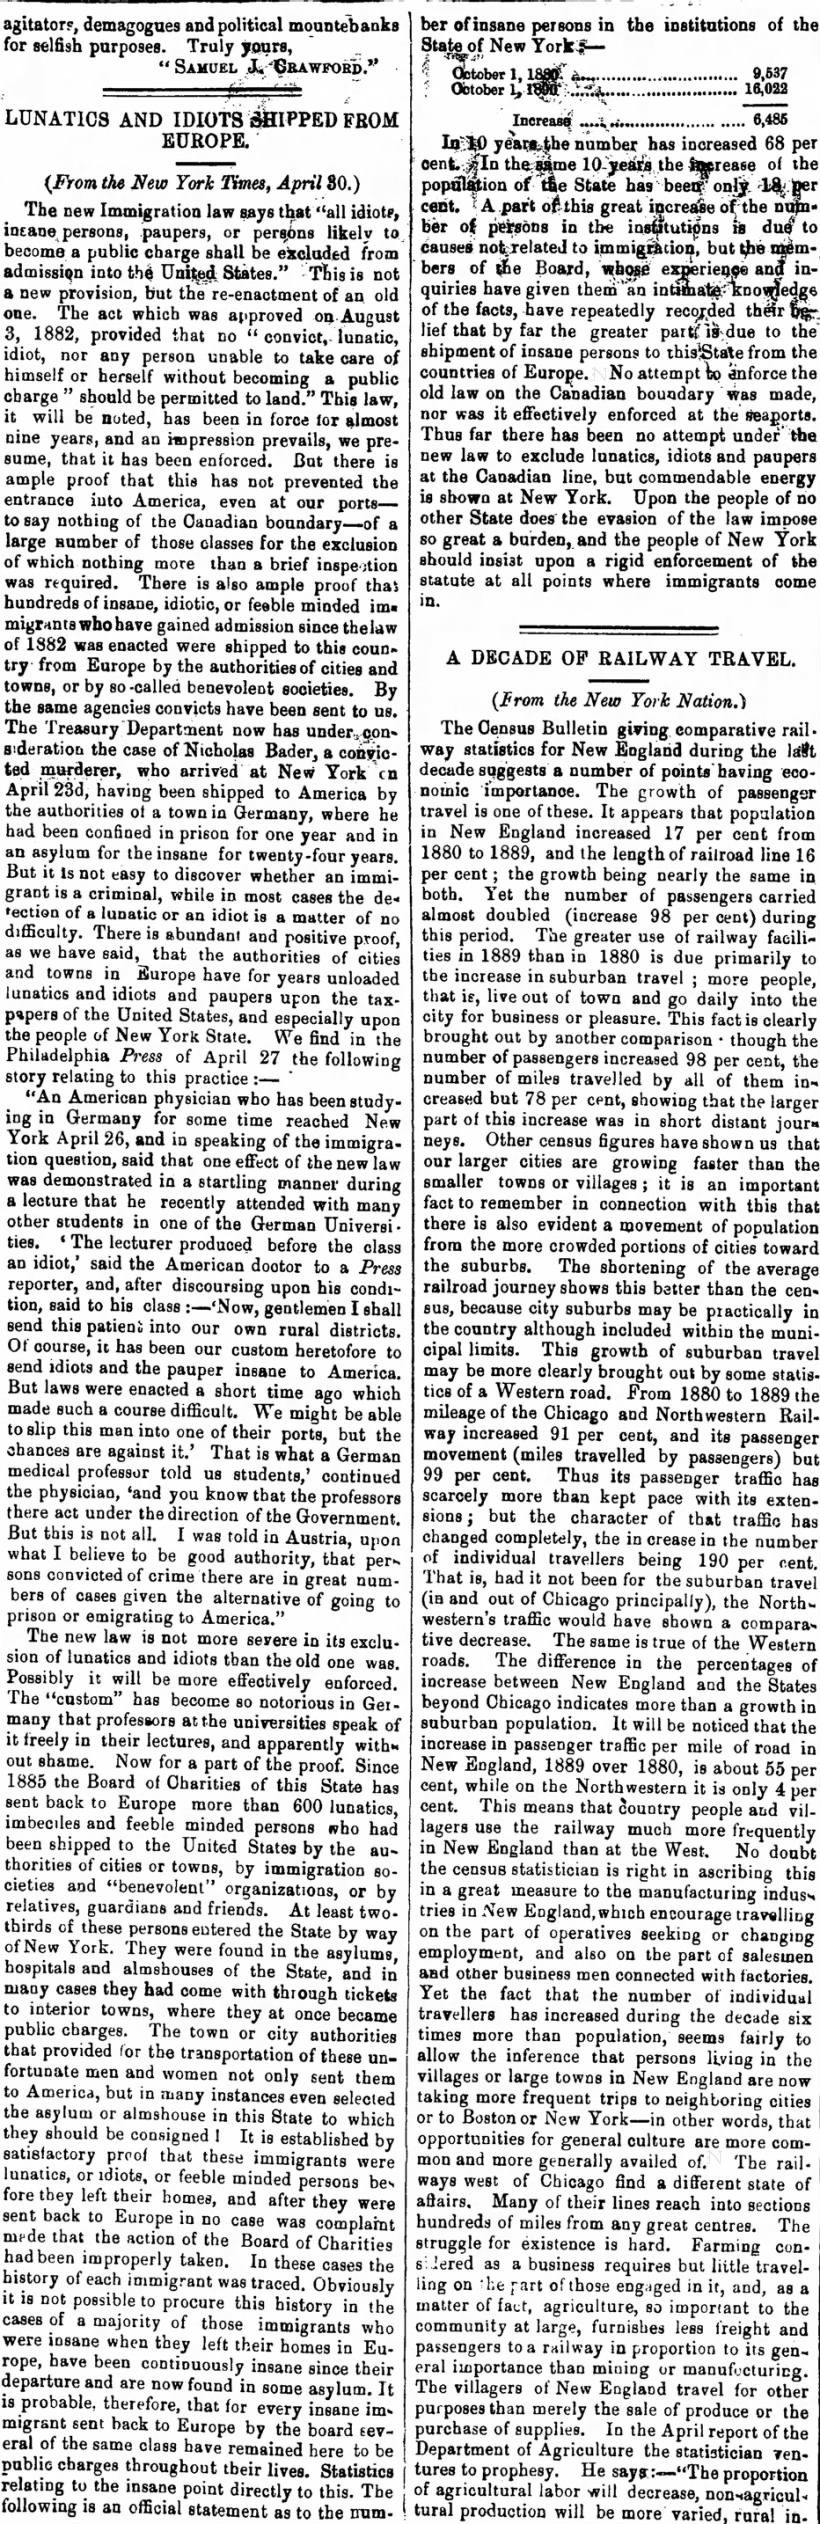 The American Settler (London) 30 May 1891
Immigration